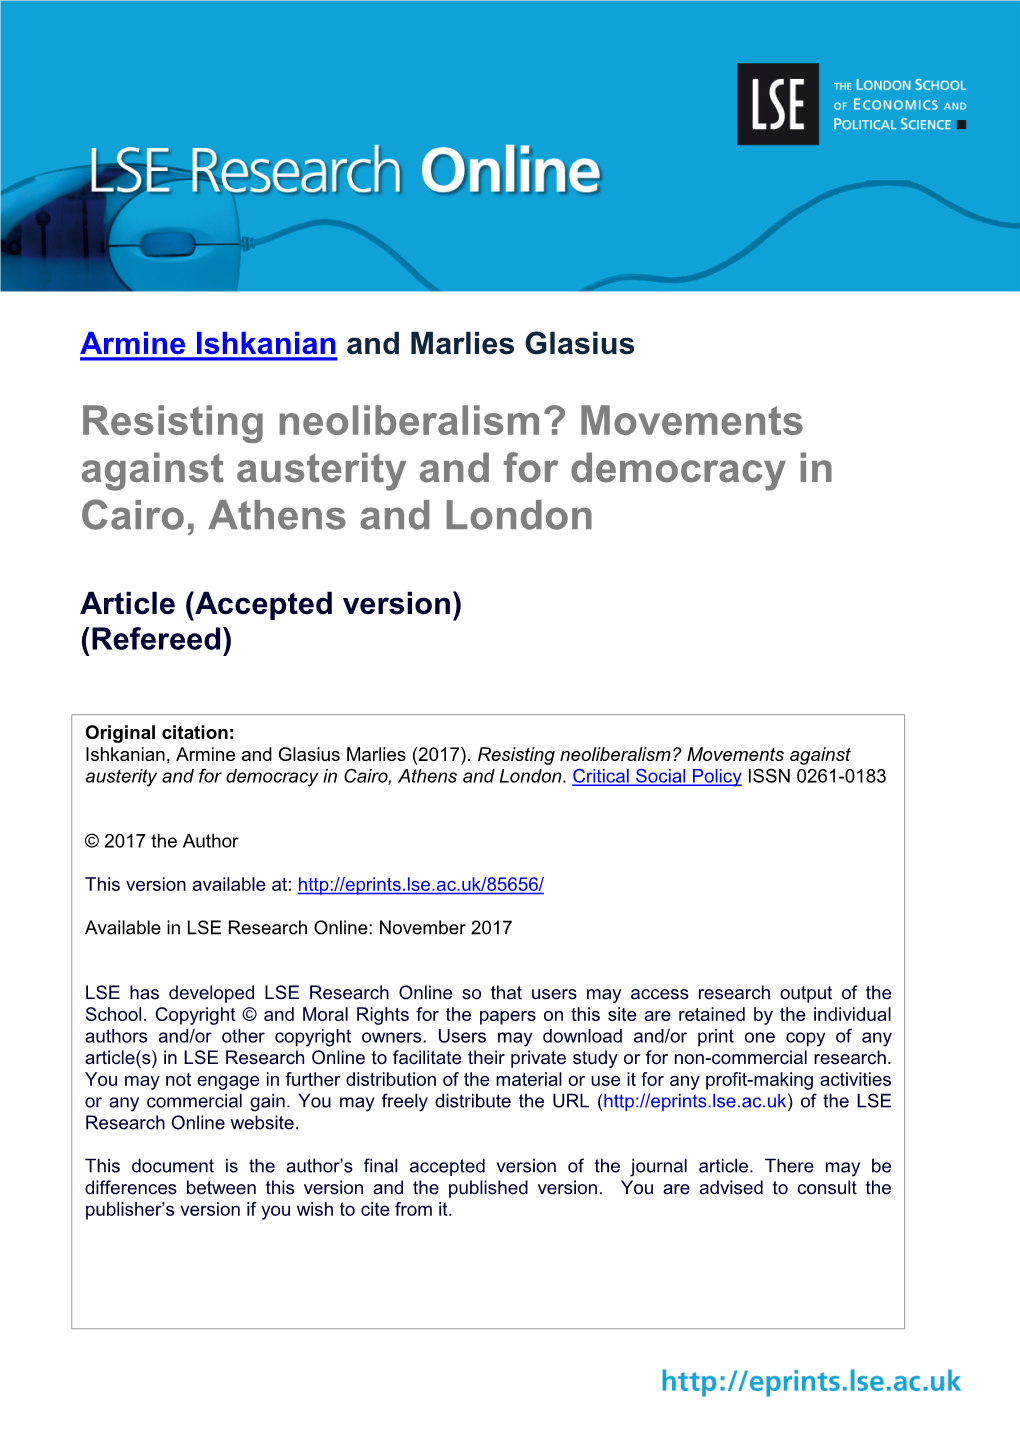 Resisting Neoliberalism? Movements Against Austerity and for Democracy in Cairo, Athens and London